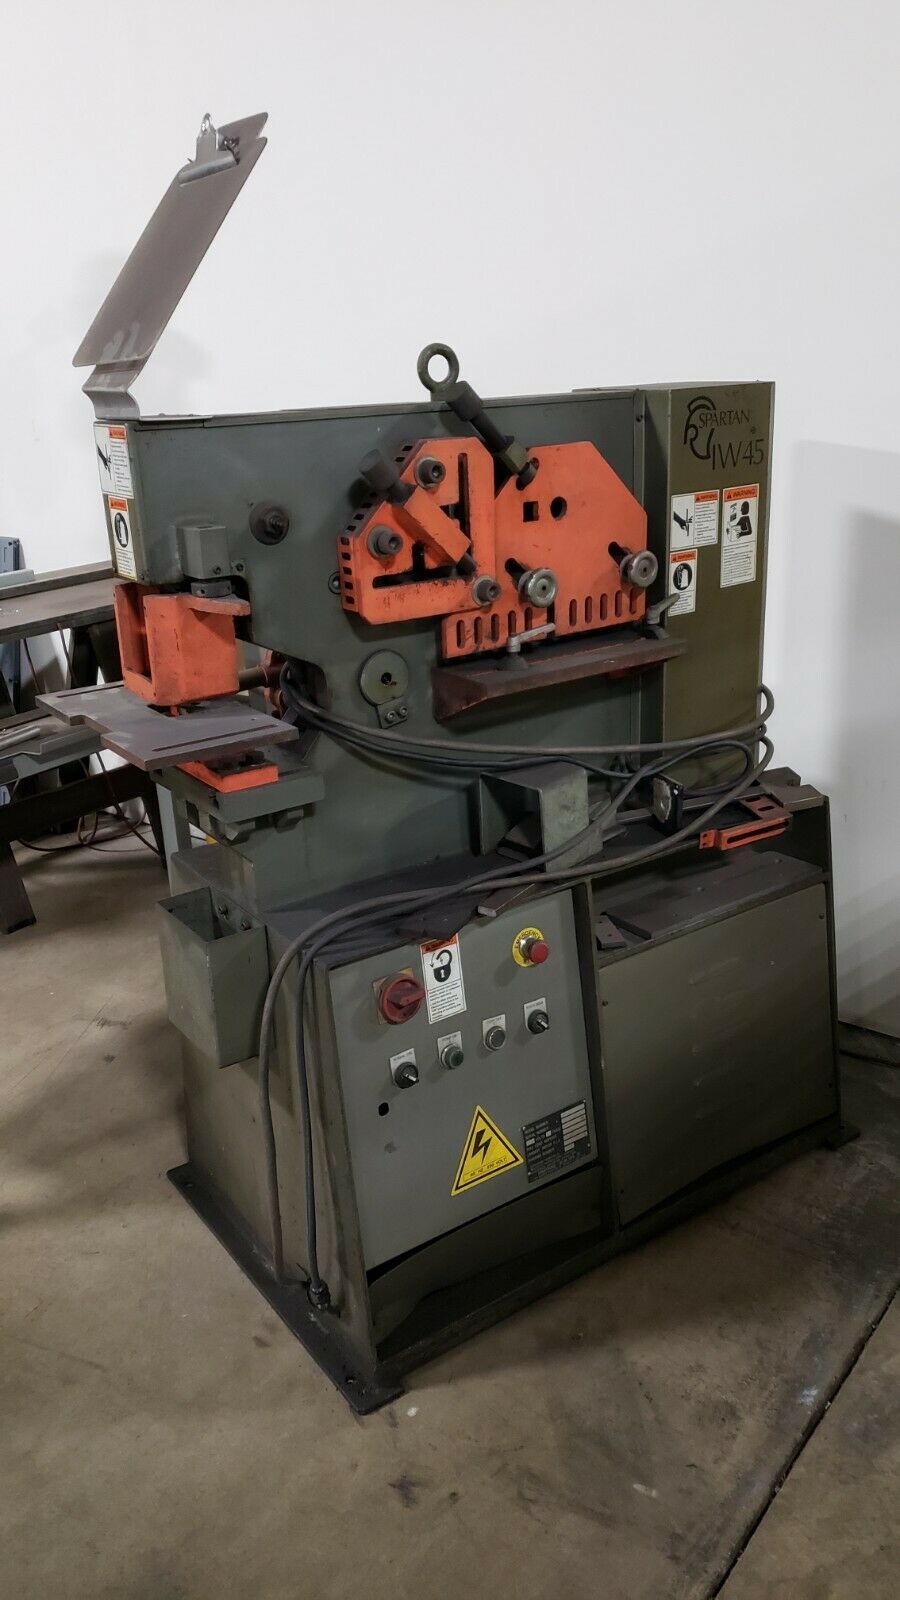 Armstrong - Blum Mfg. Co. Spartan IW45 Ironworker with Feed Table and Punch Dies